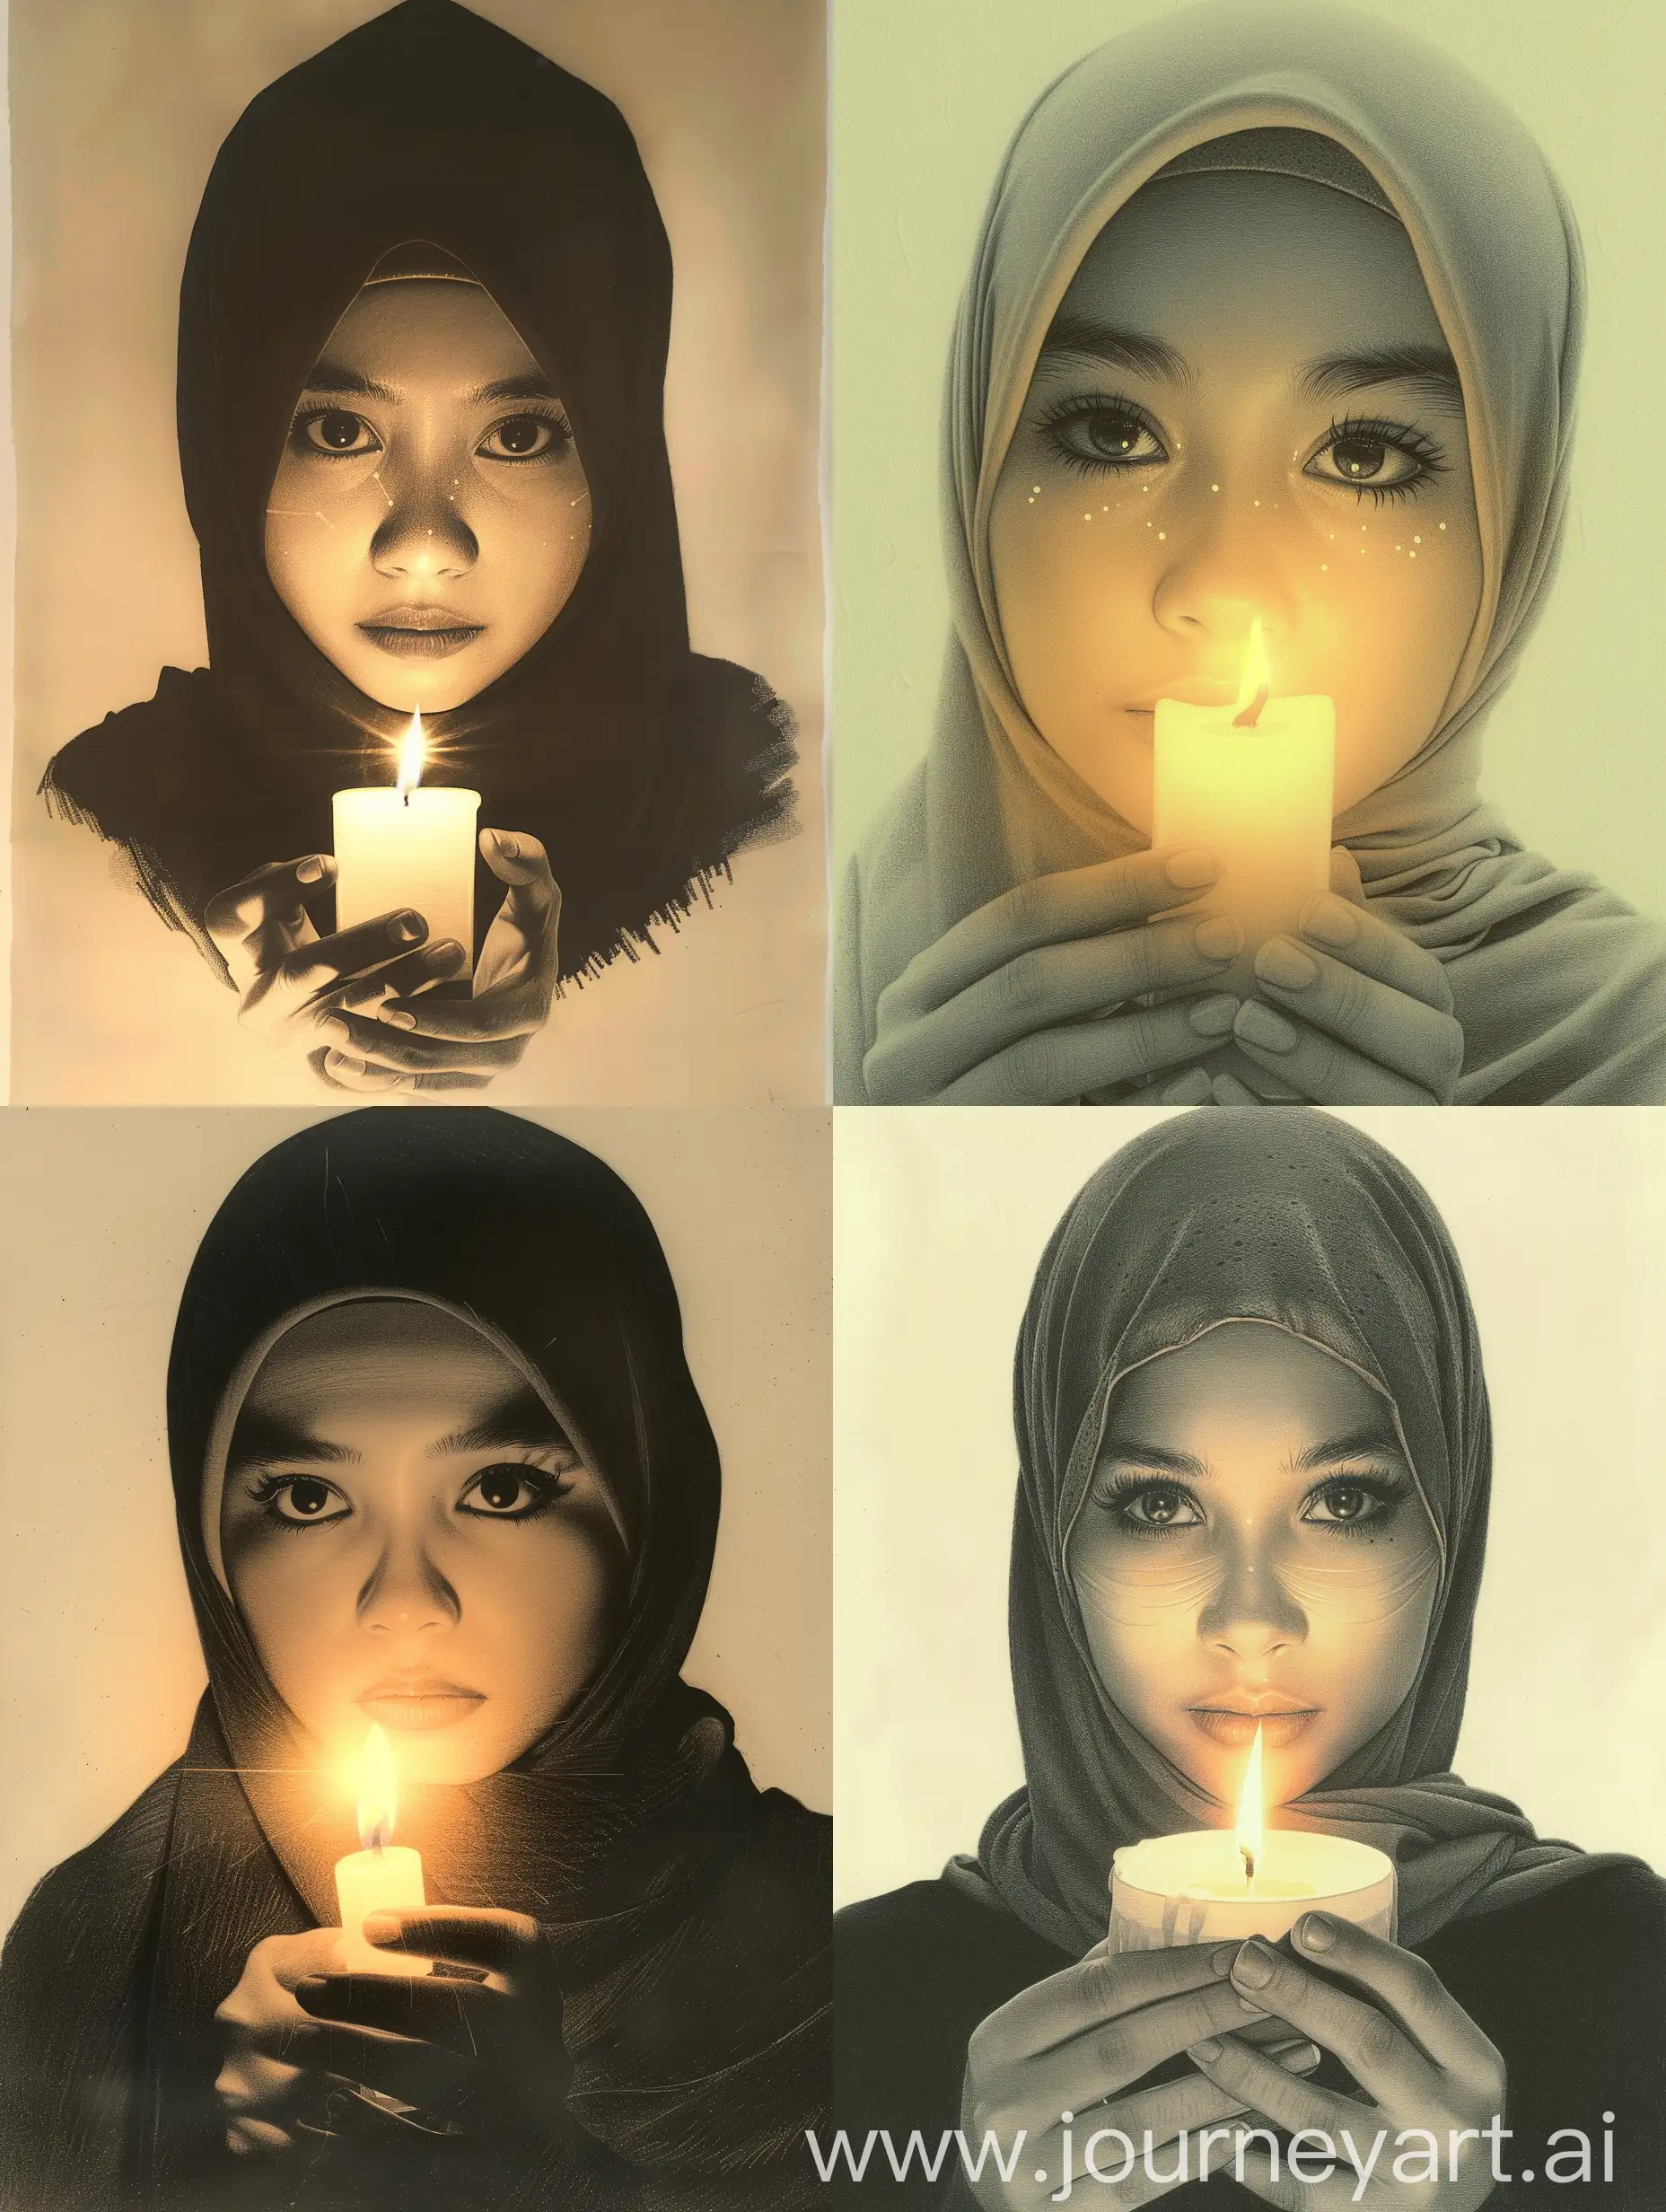 Candle light reflects off an image, creating a strong surface effect & photorealistic effect, simple black pencil drawing with no fill, on a cream background, a very beautiful Indonesian hijab woman with beautiful eyes holding a candle, bright candle light reflecting on her young face woman, creates a strong surface effect making her face smooth with a photorealistic effect that displays the beauty of flawless skin in the image. in a bas relief effect style with a photorealistic colored finish. soft and light natural skin tone isolated on the face. shadow & light effects.